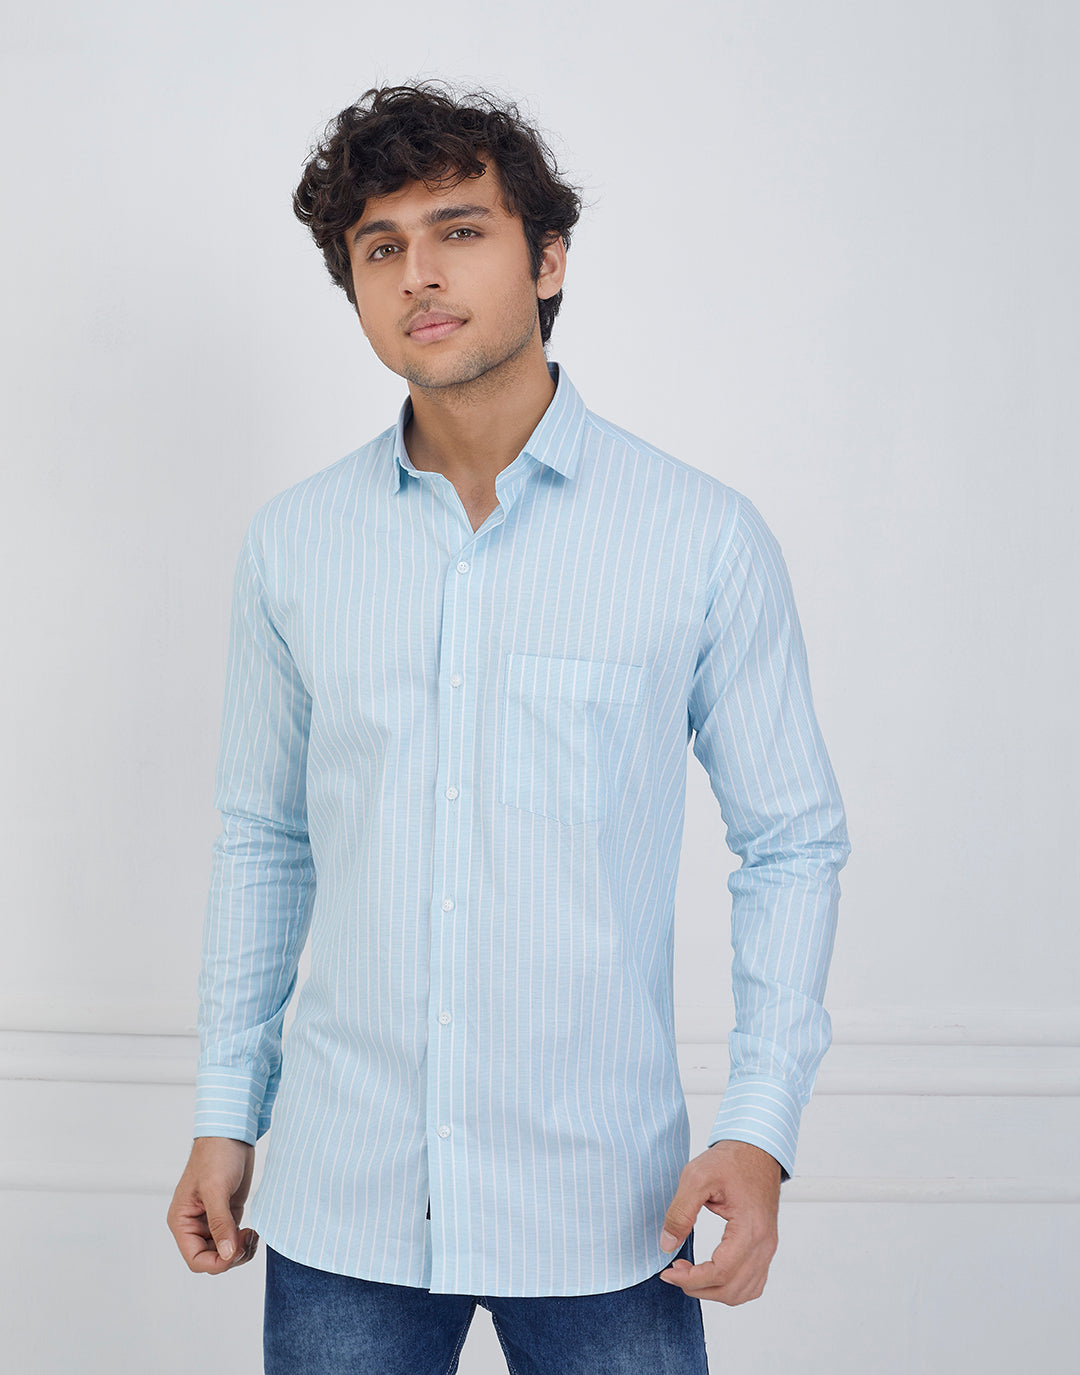 Ice White Lines on Arctic Blue Shirt